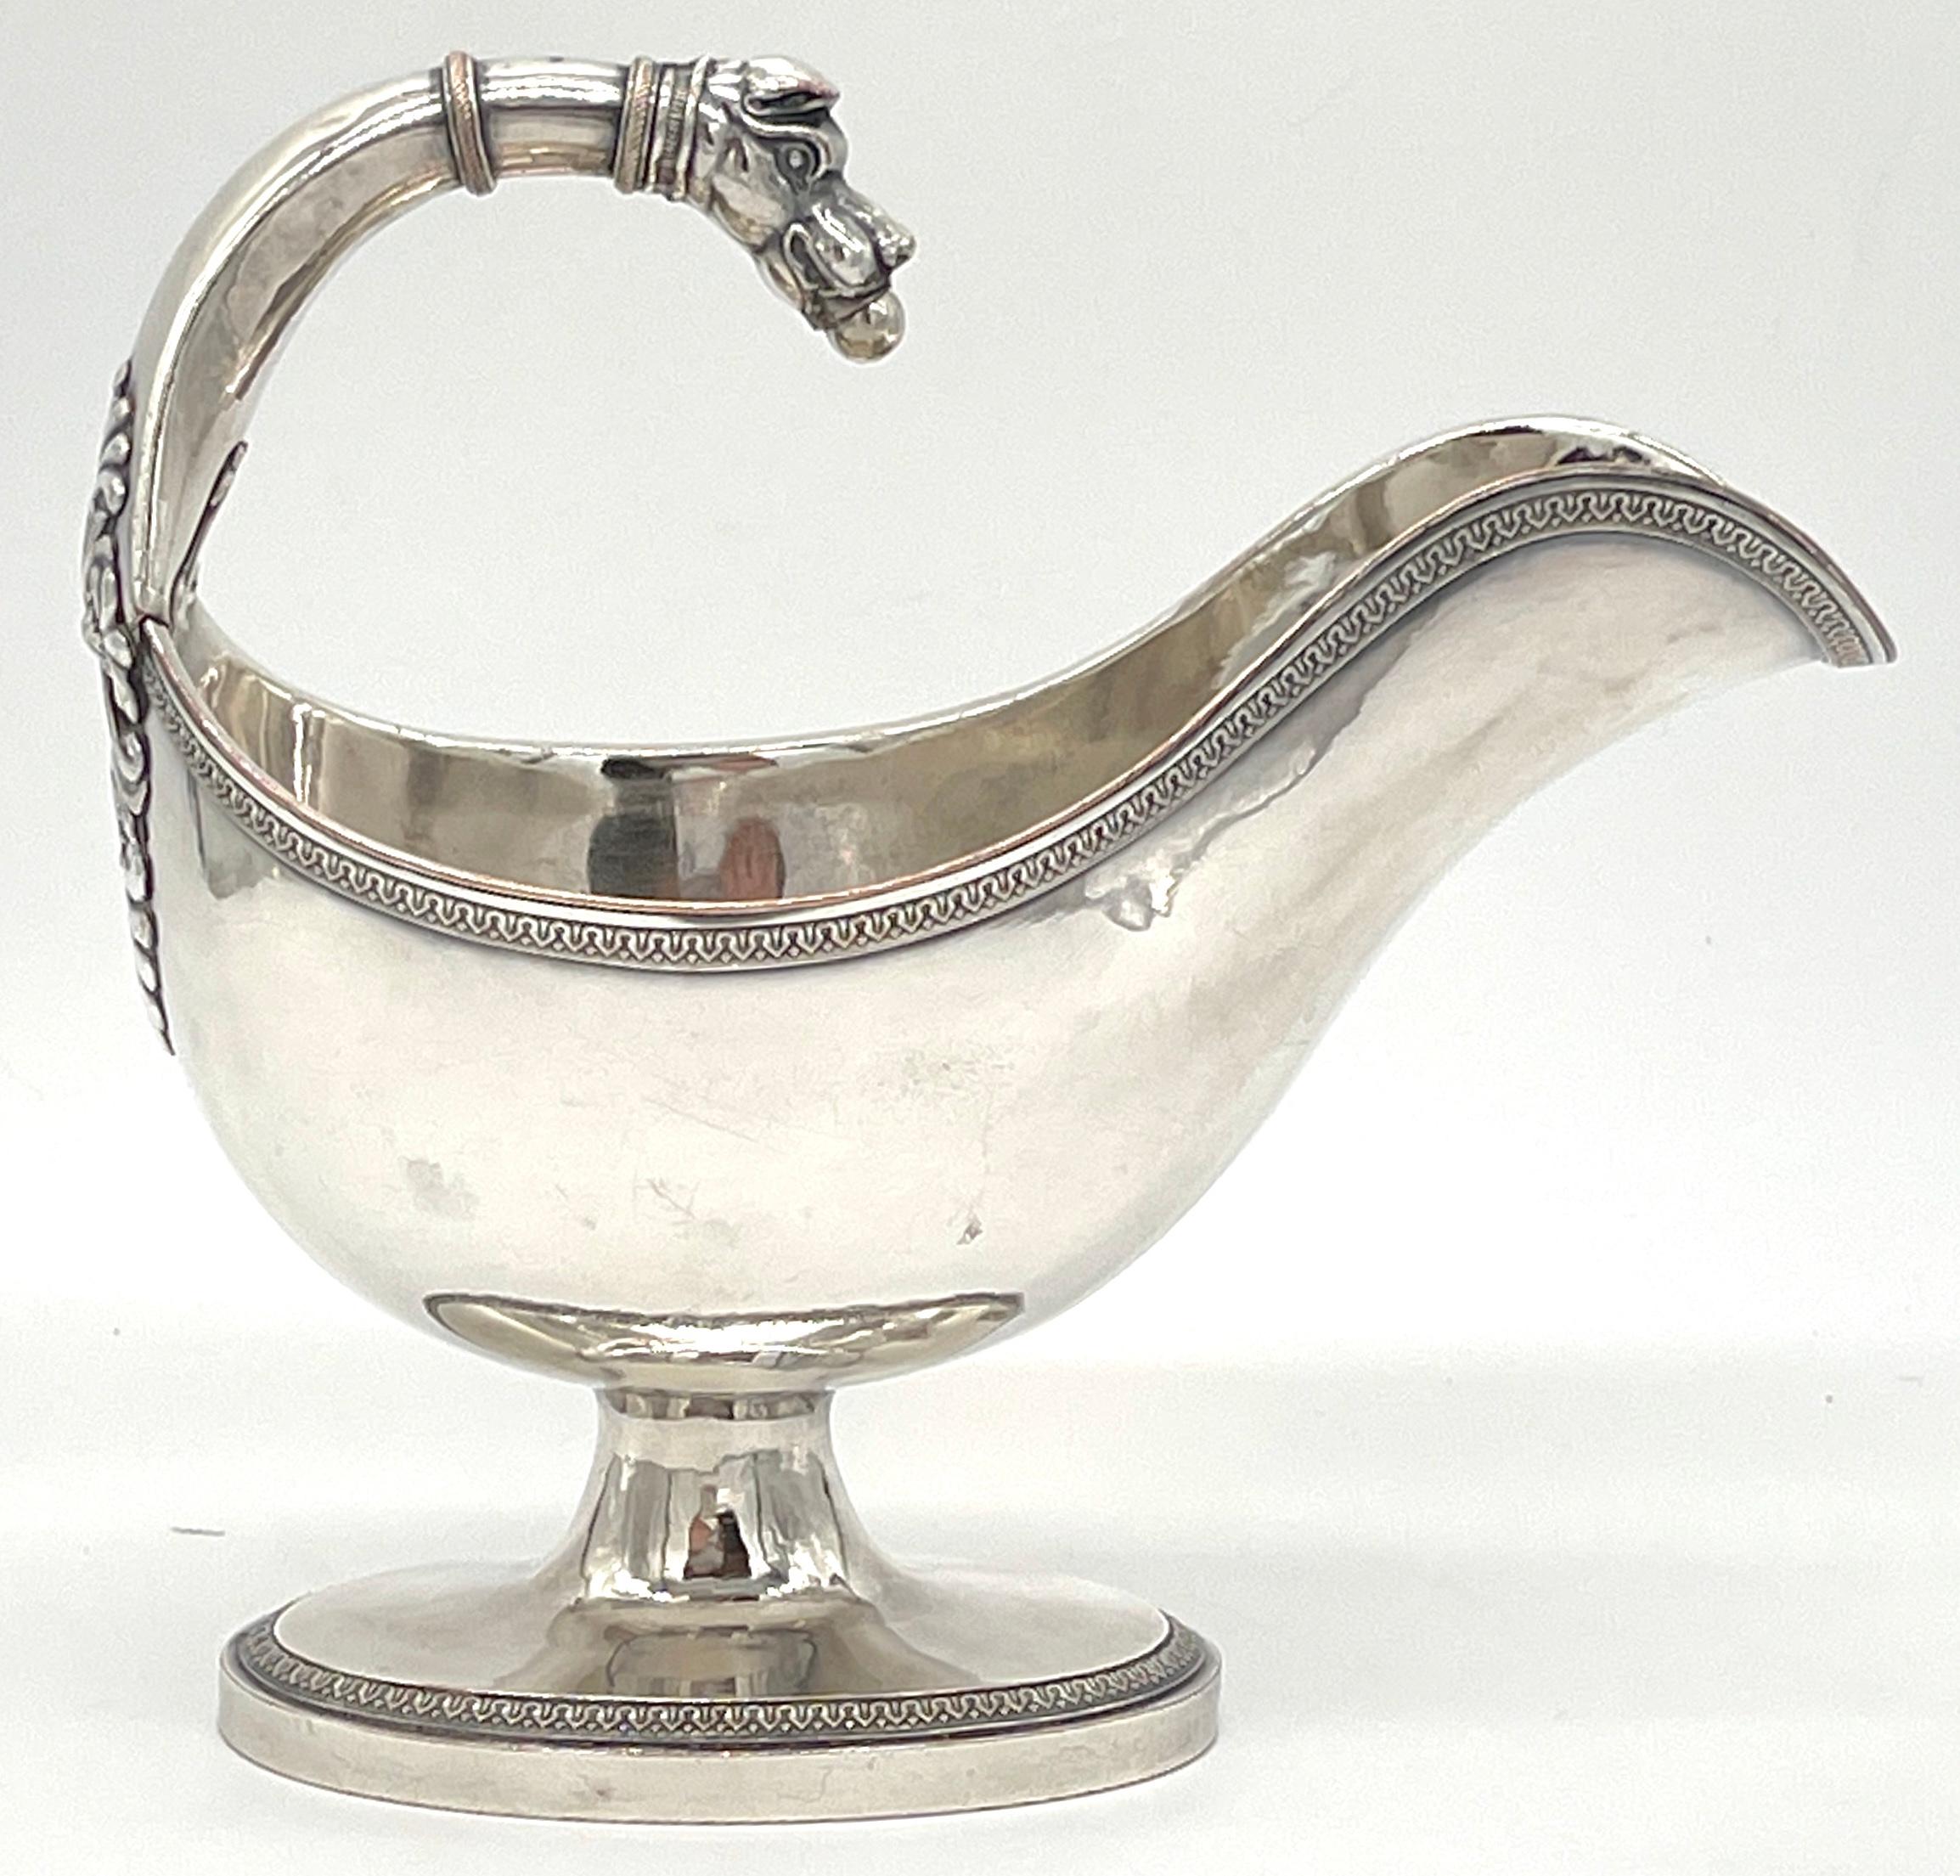 19th Century French Silverplated Christofle Style Dog Motif Gravy/ Sauce Boat
Bearing Hallmarks, Possibly French , Mid 19th Century 

This restrained elegant 19th Century French silverplated Christofle style dog motif gravy/sauce Boat, reflects the